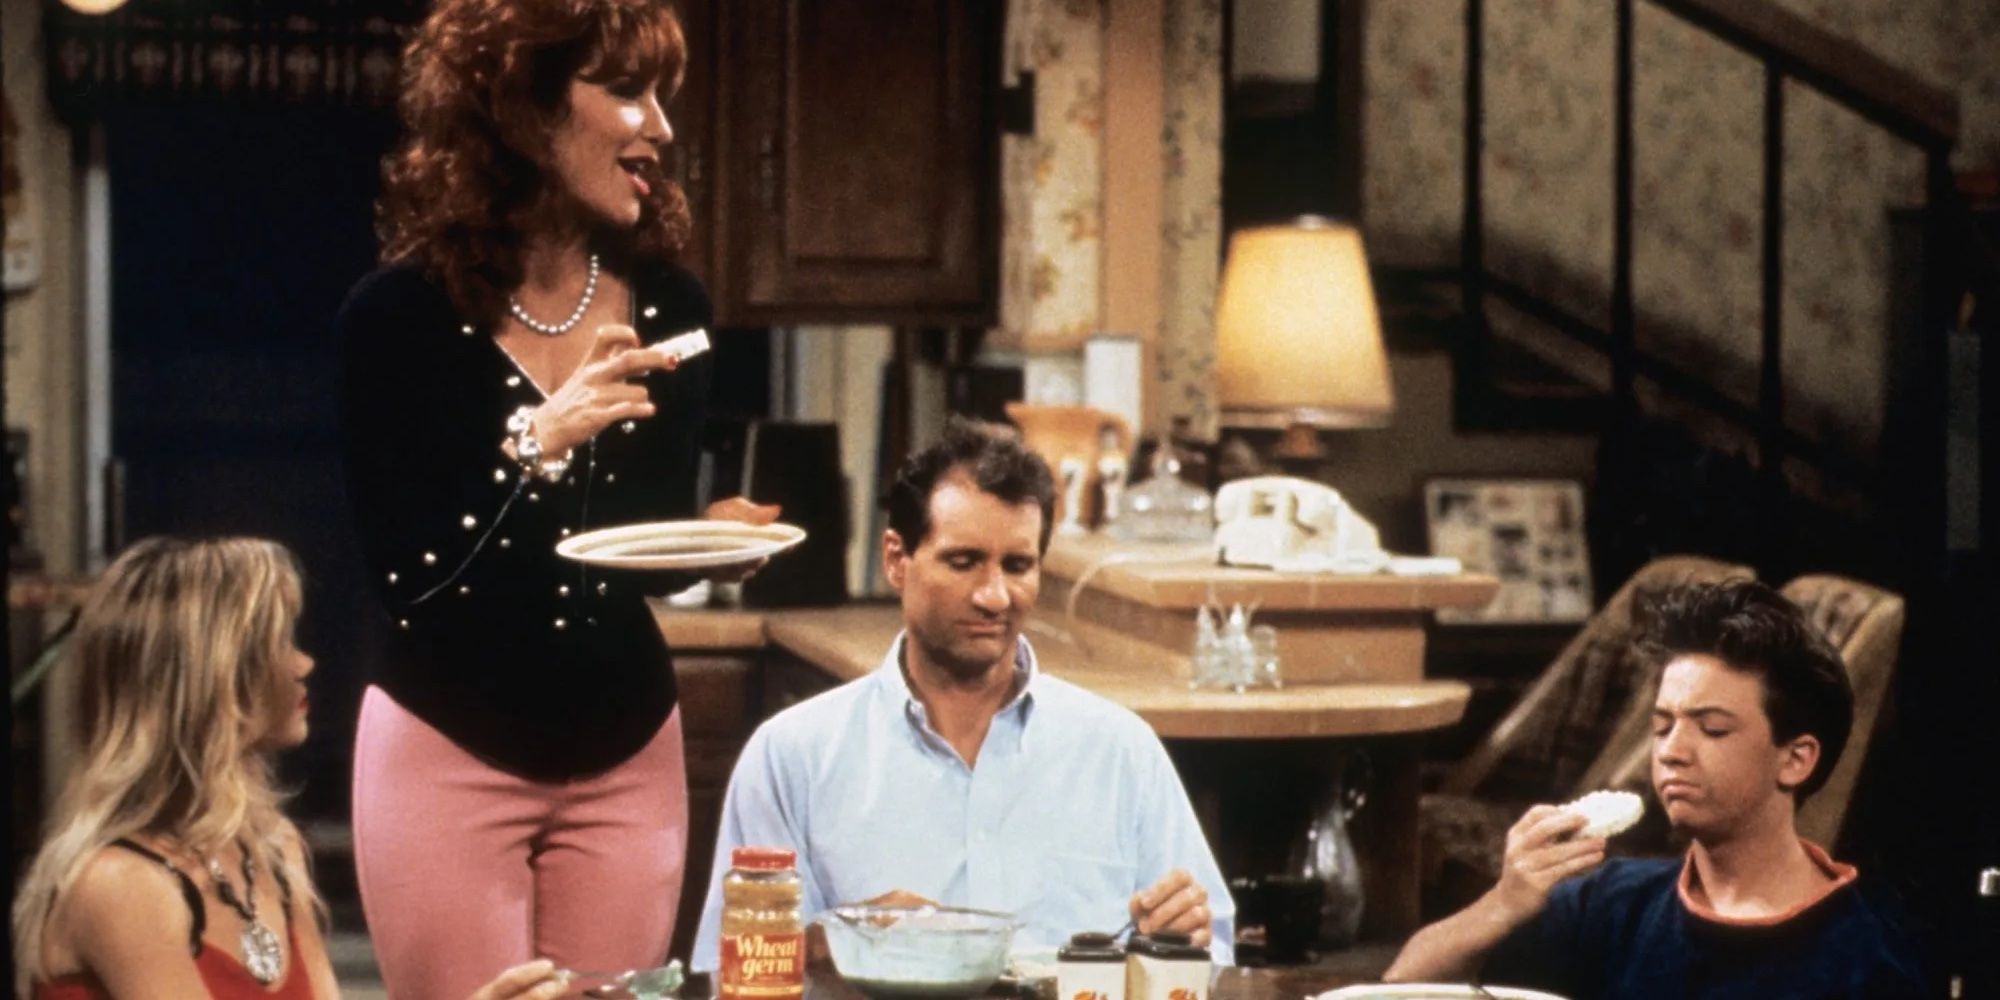 The cast of 'Married With Children' eats together at the table